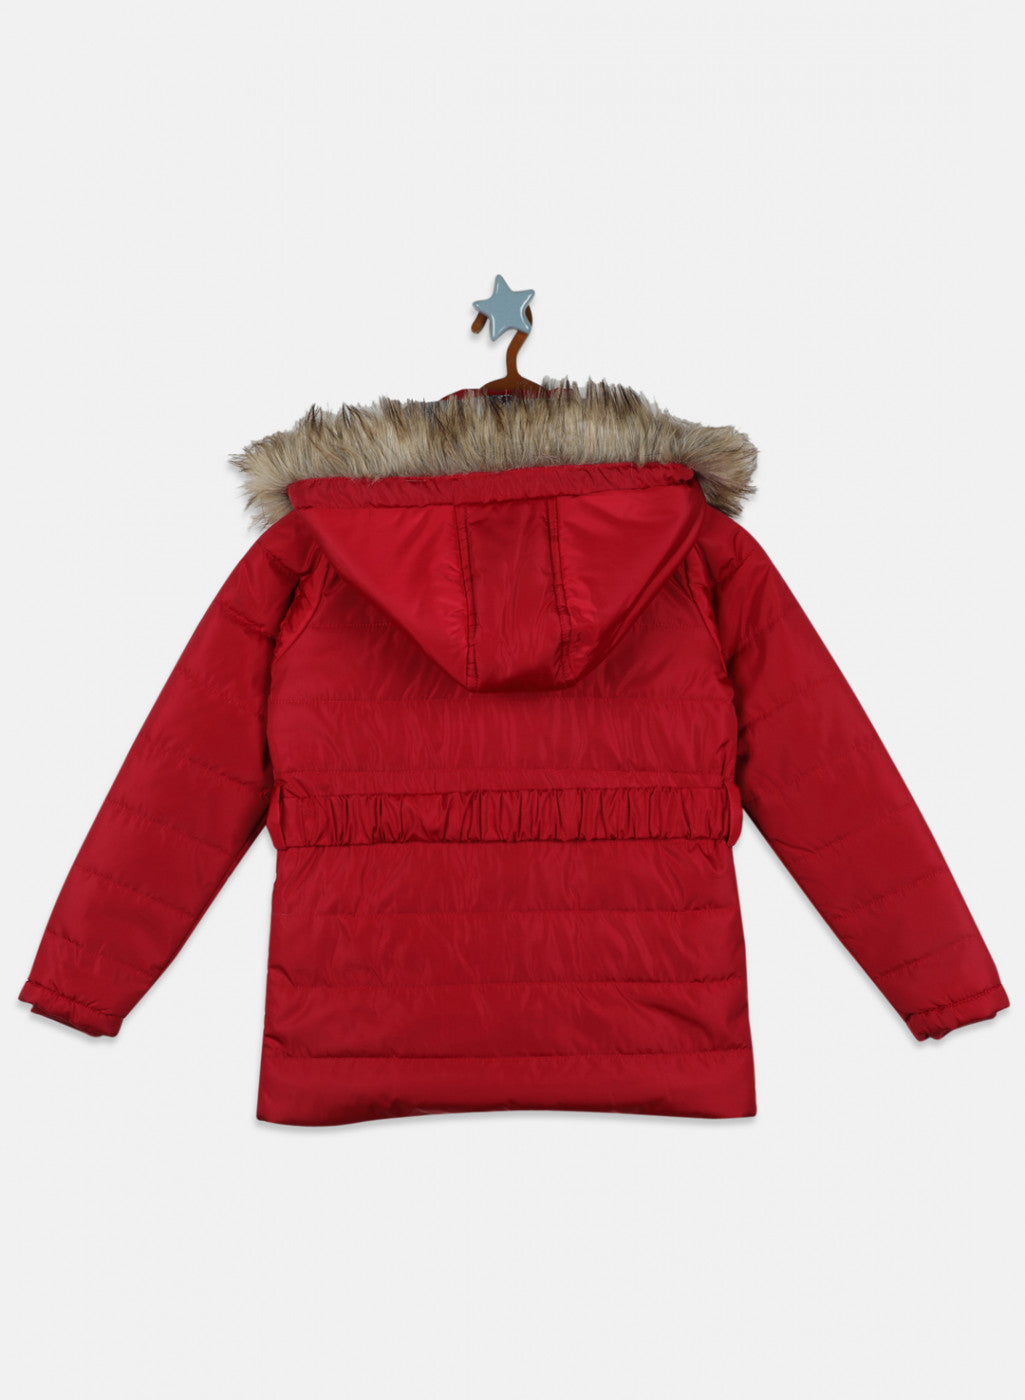 Girls Red Solid Jacket